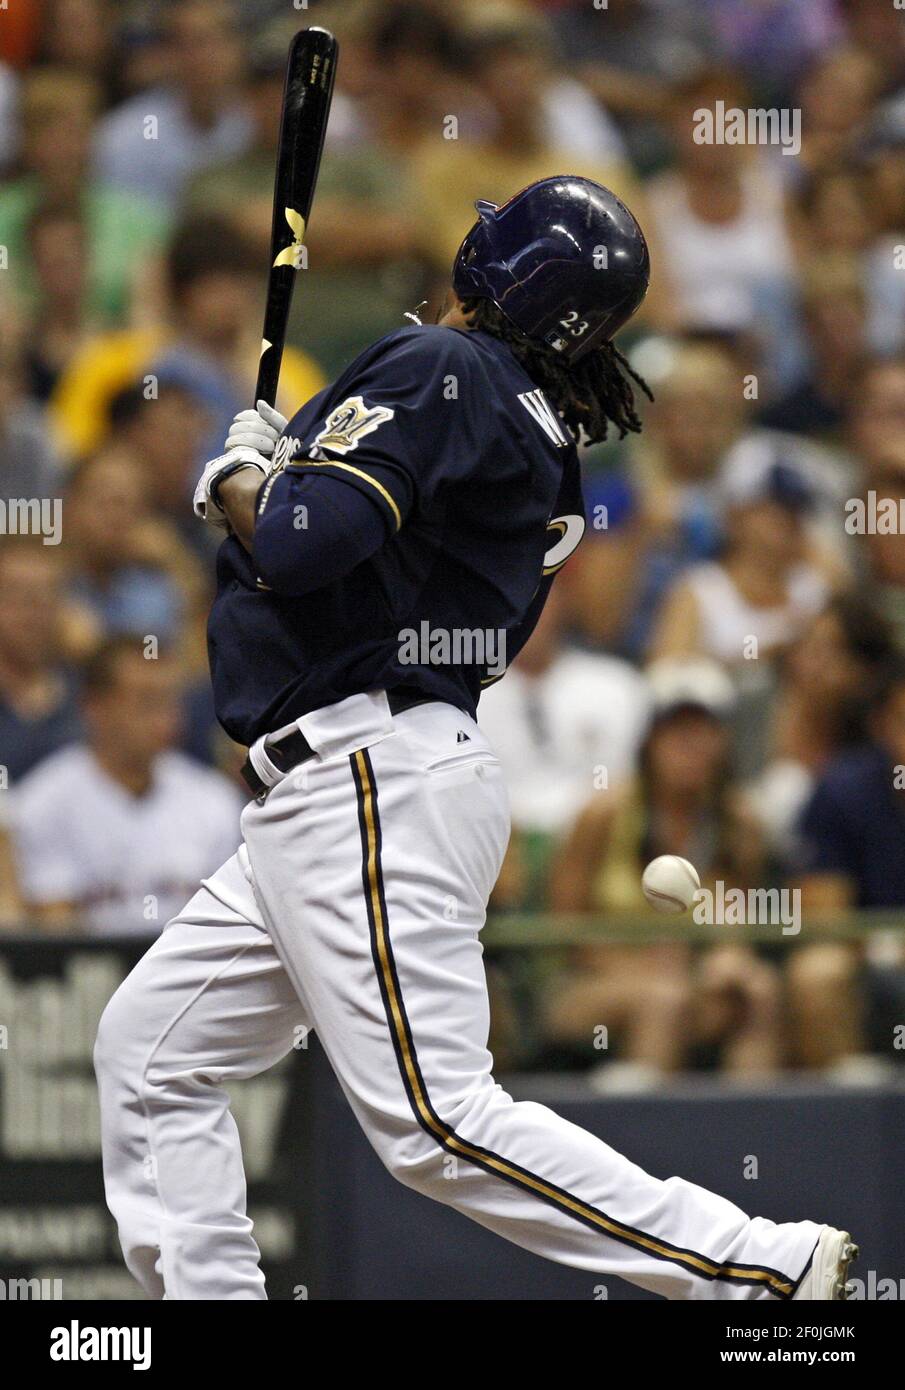 The Milwaukee Brewers&apos; Rickie Weeks is hit by a pitch from the Pittsburgh Pirates&apos; Sean Gallagher in the sixth inning. The Brewers defeated the Pirates, 4-3, at Miller Park in Milwaukee, Wisconsin, Saturday, July 10, 2010. (Photo by Benny Sieu/Milwaukee Journal Sentinel/MCT/Sipa USA) Stock Photo